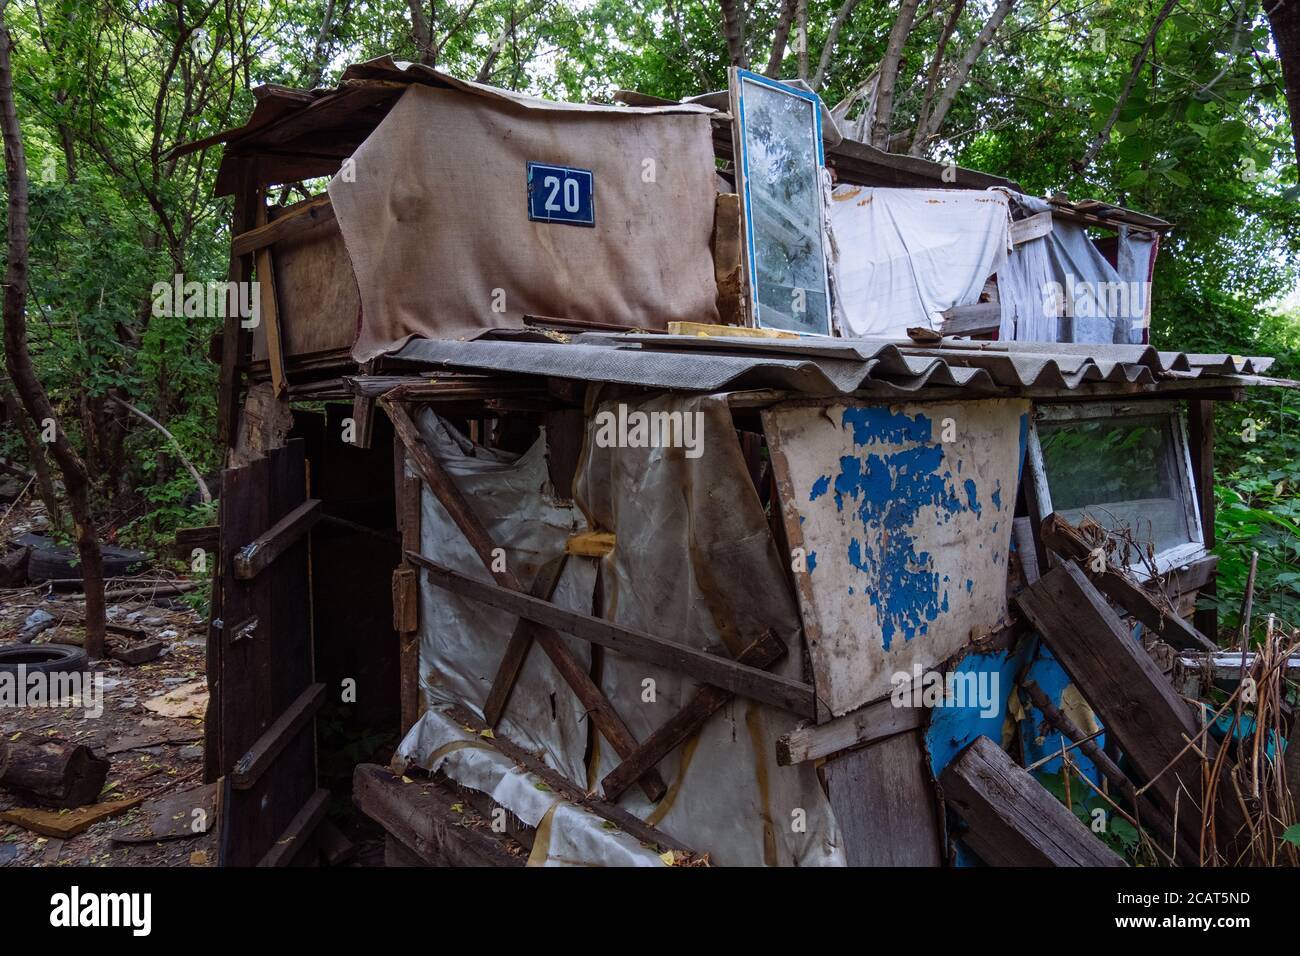 Homeless dweling. Small habitation made from garbage in dirty littered forest Stock Photo